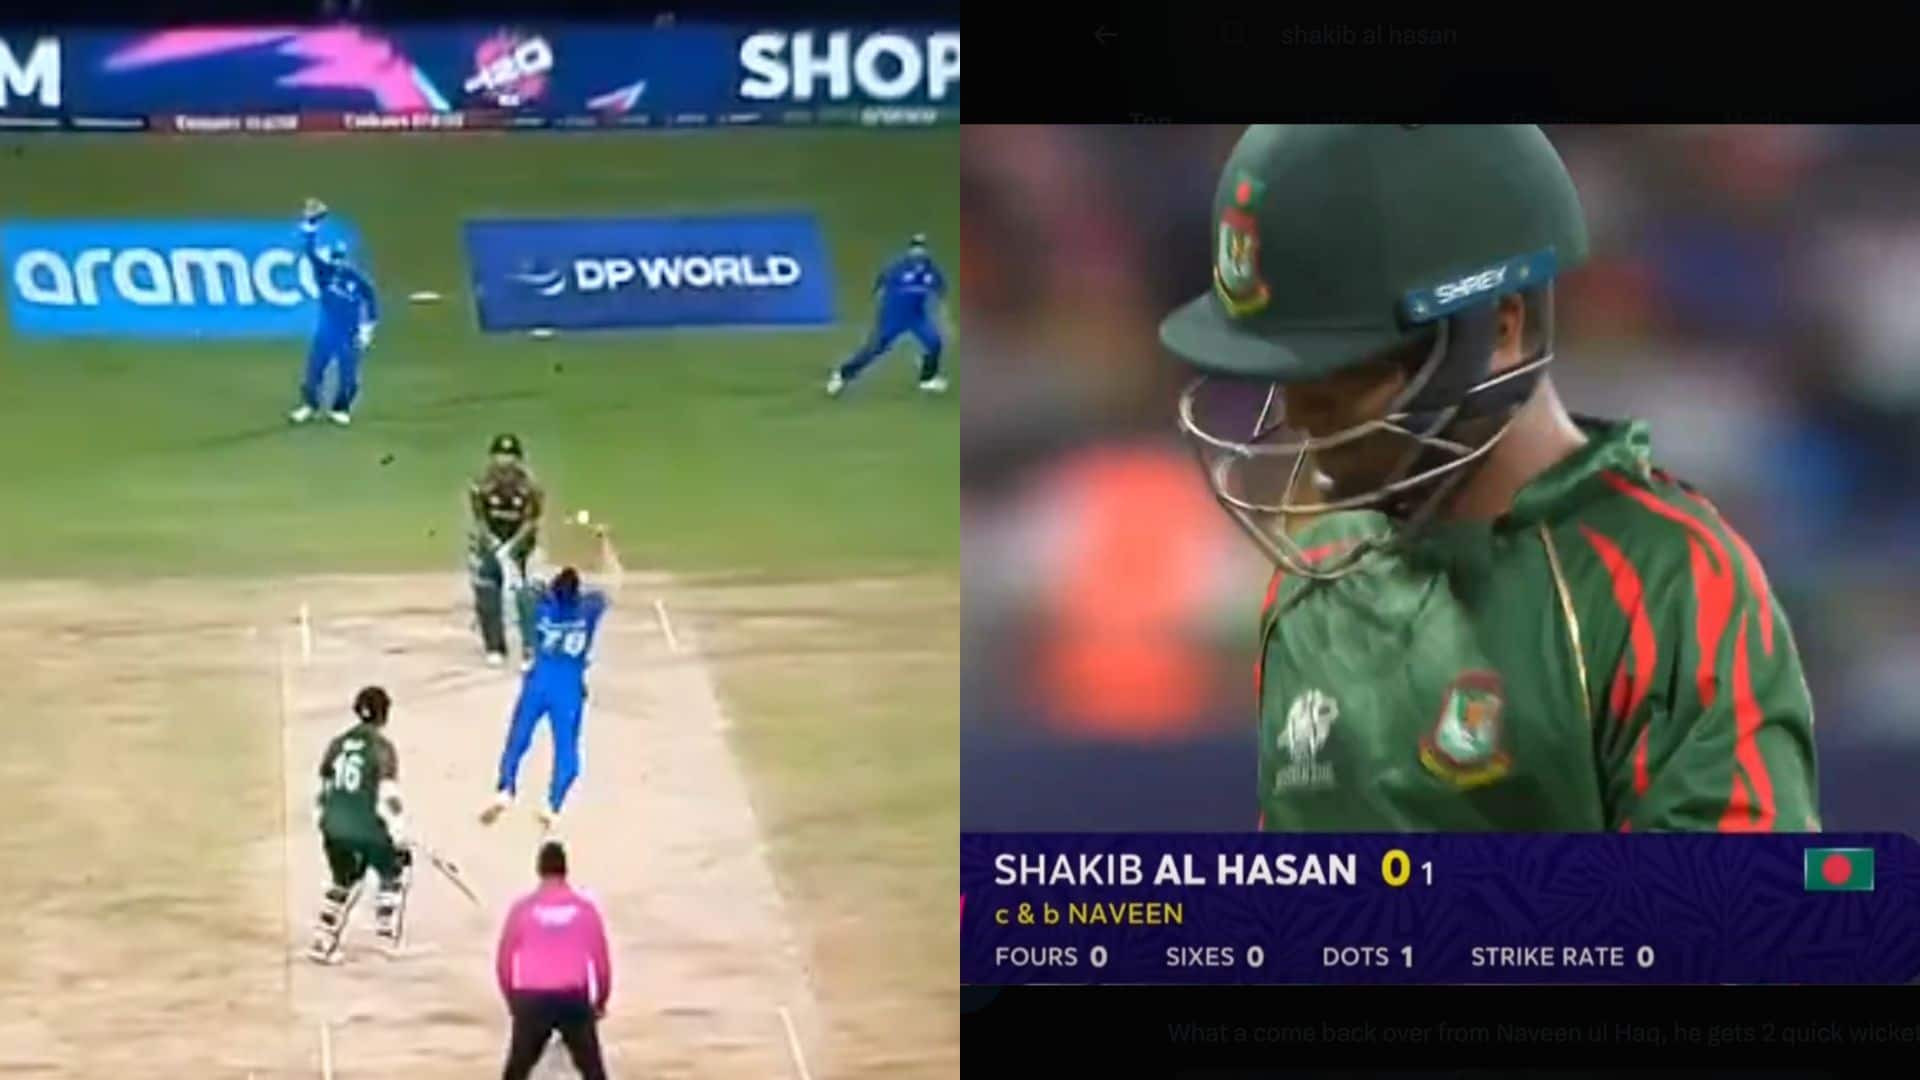 Shakib was dismissed for a golden duck [X]